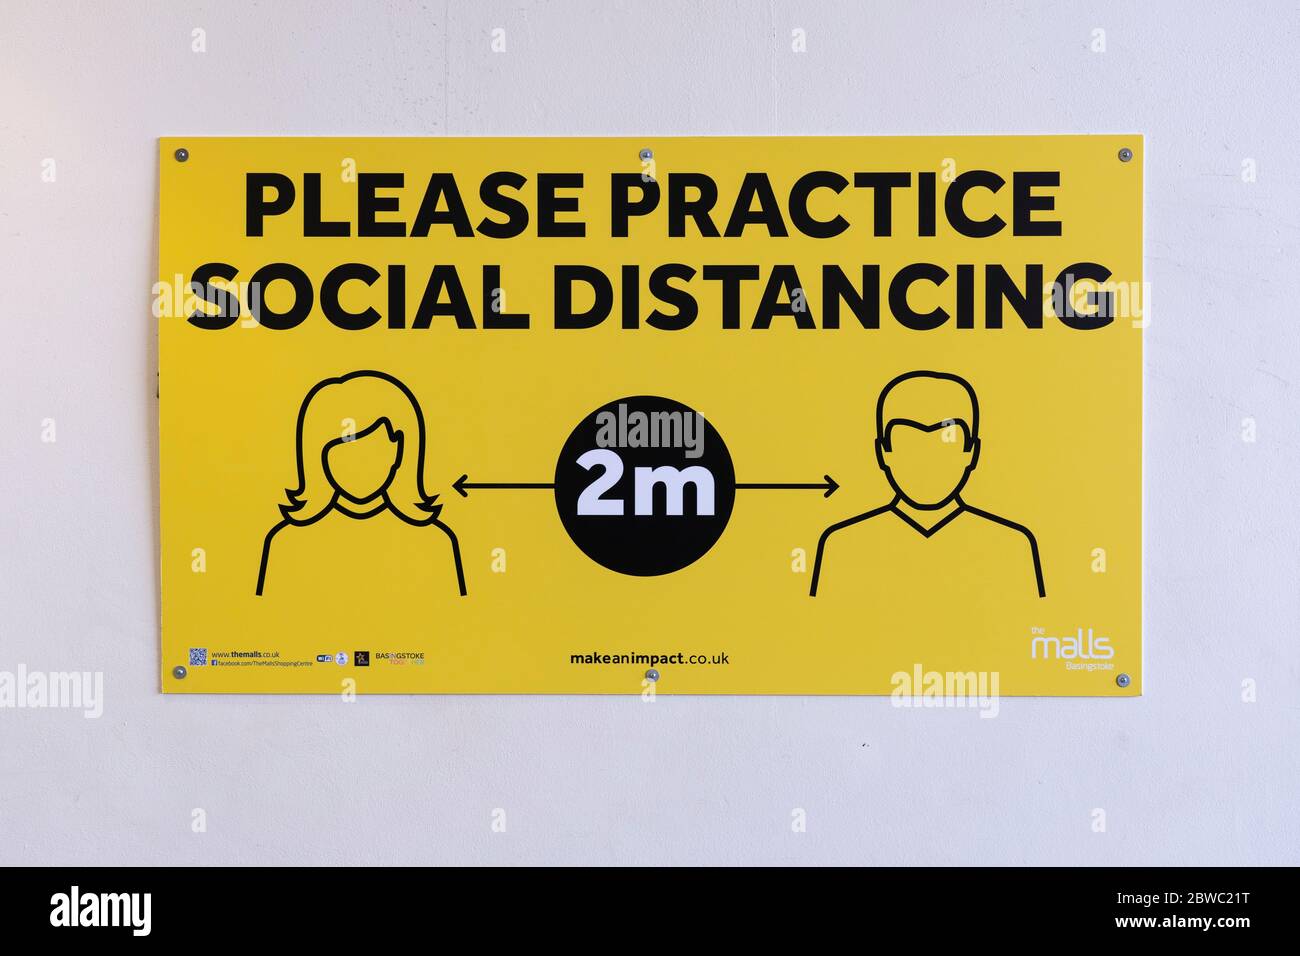 A sign in The Malls, Basingstoke, requesting that people practice social distancing and keep 2m distance during the Covid 19 Coronavirus pandemic, UK Stock Photo